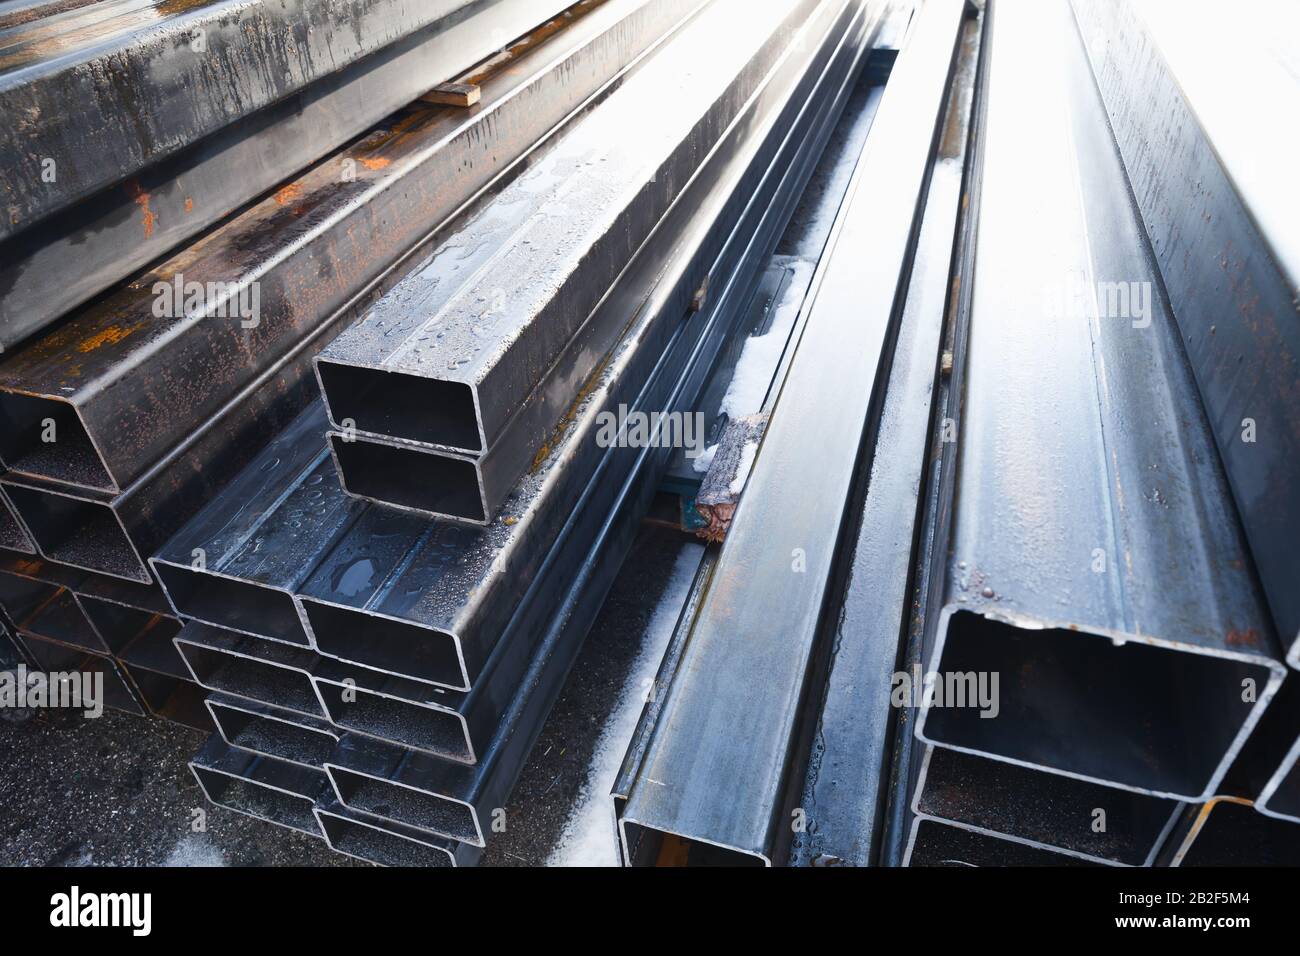 Stack of rolled metal products is in a storage, perspective view of steel pipes of rectangular cross-section Stock Photo